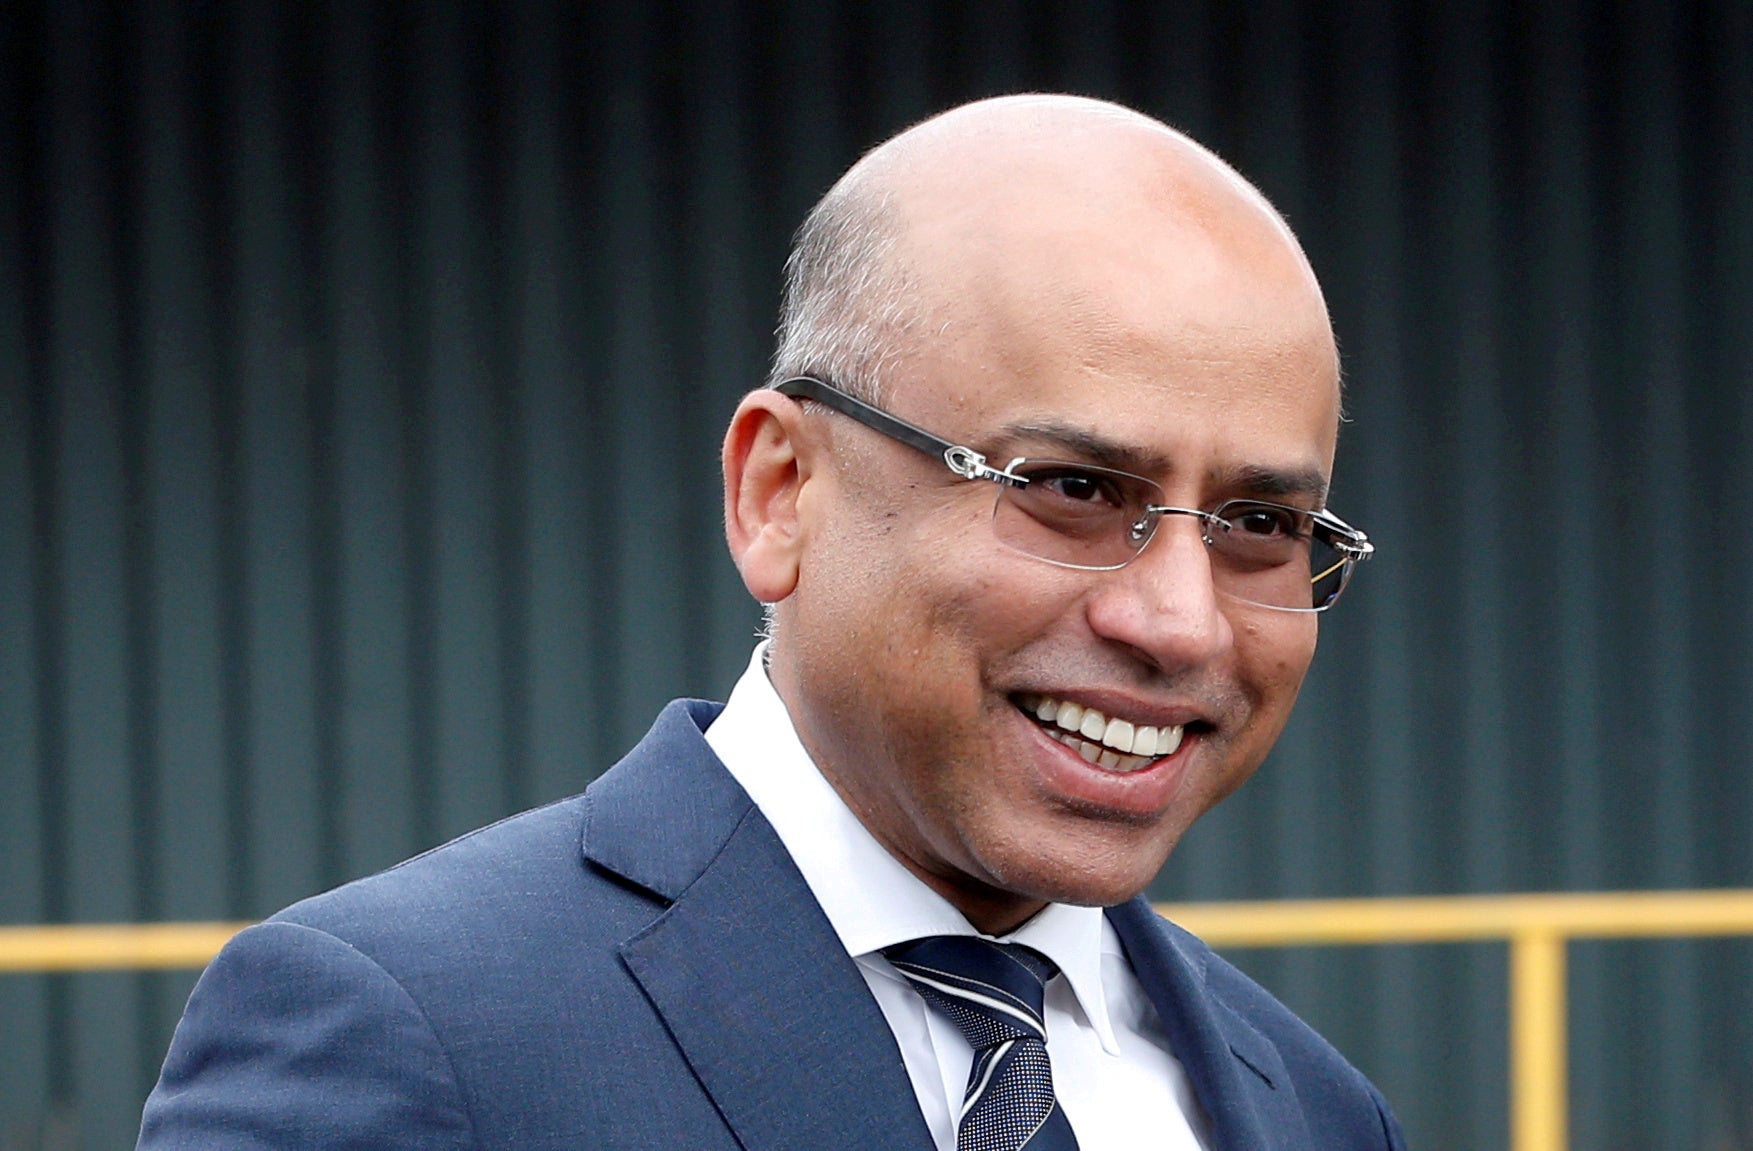 Mr Gupta said Liberty’s recent efforts to make ‘efficiency gains’ are paying ‘good results’